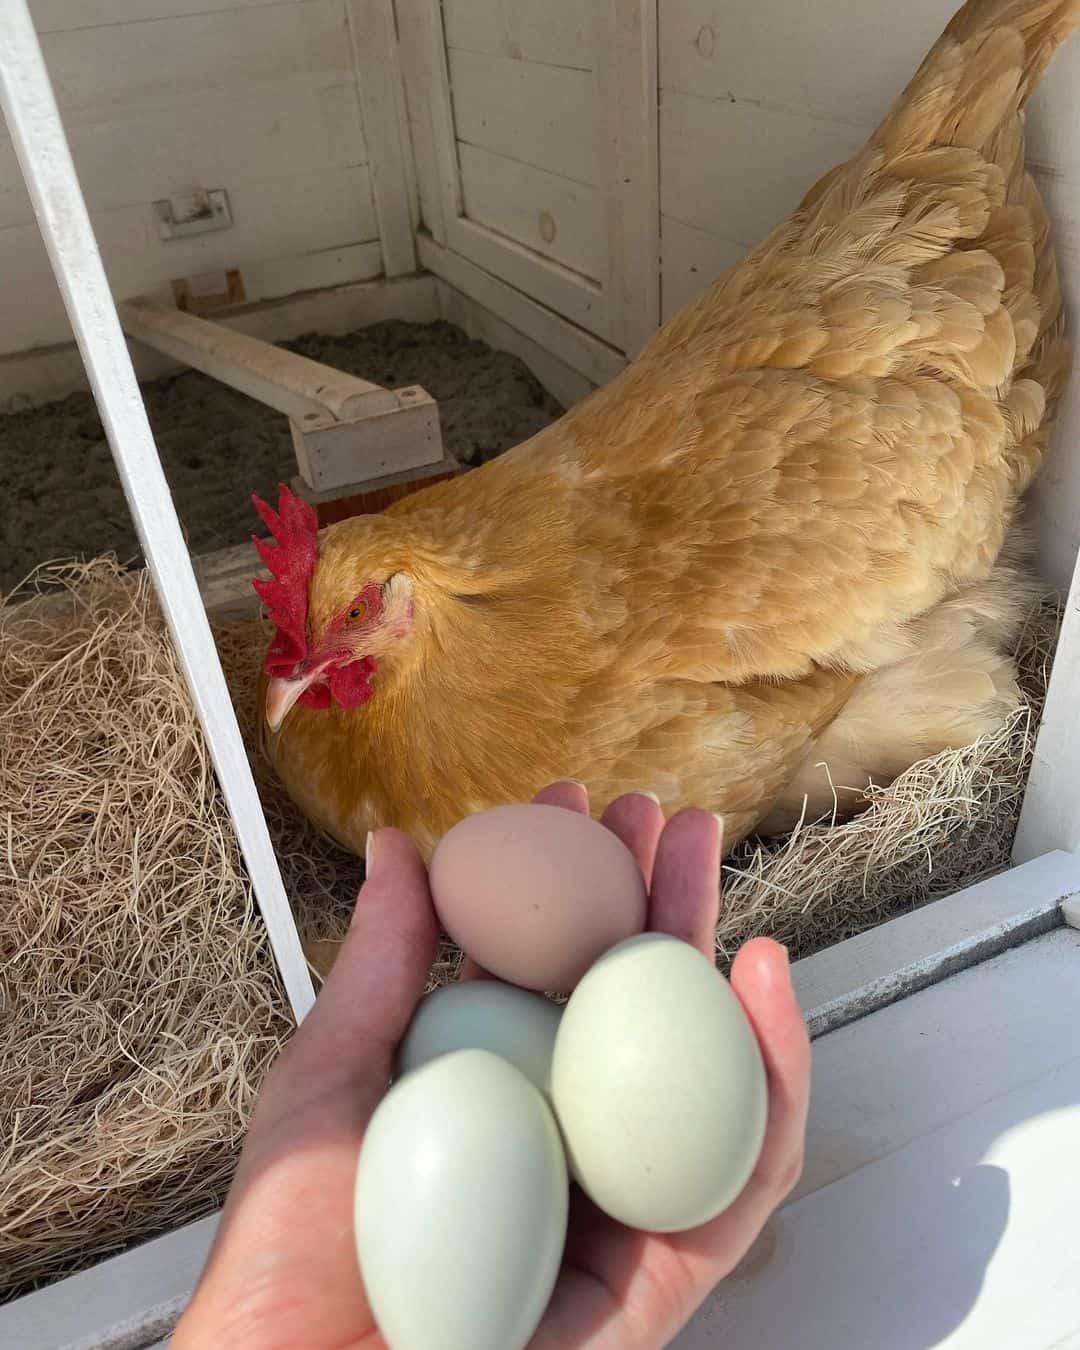 What Egg Colors Come From Which Breeds?